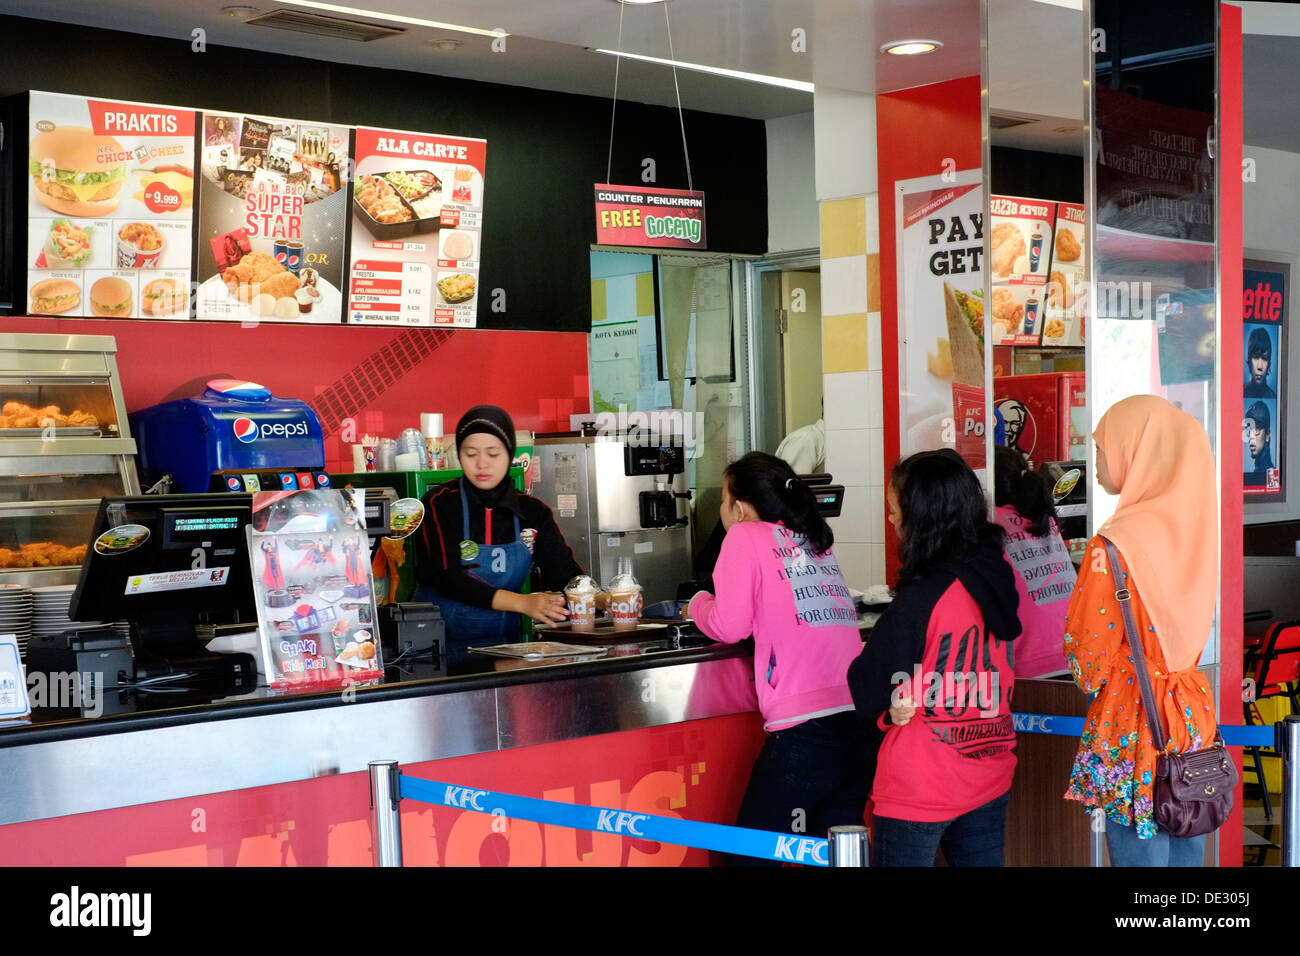 customers queue for fast food in a kentucky fried chicken branch in kediri java indonesia Stock Photo